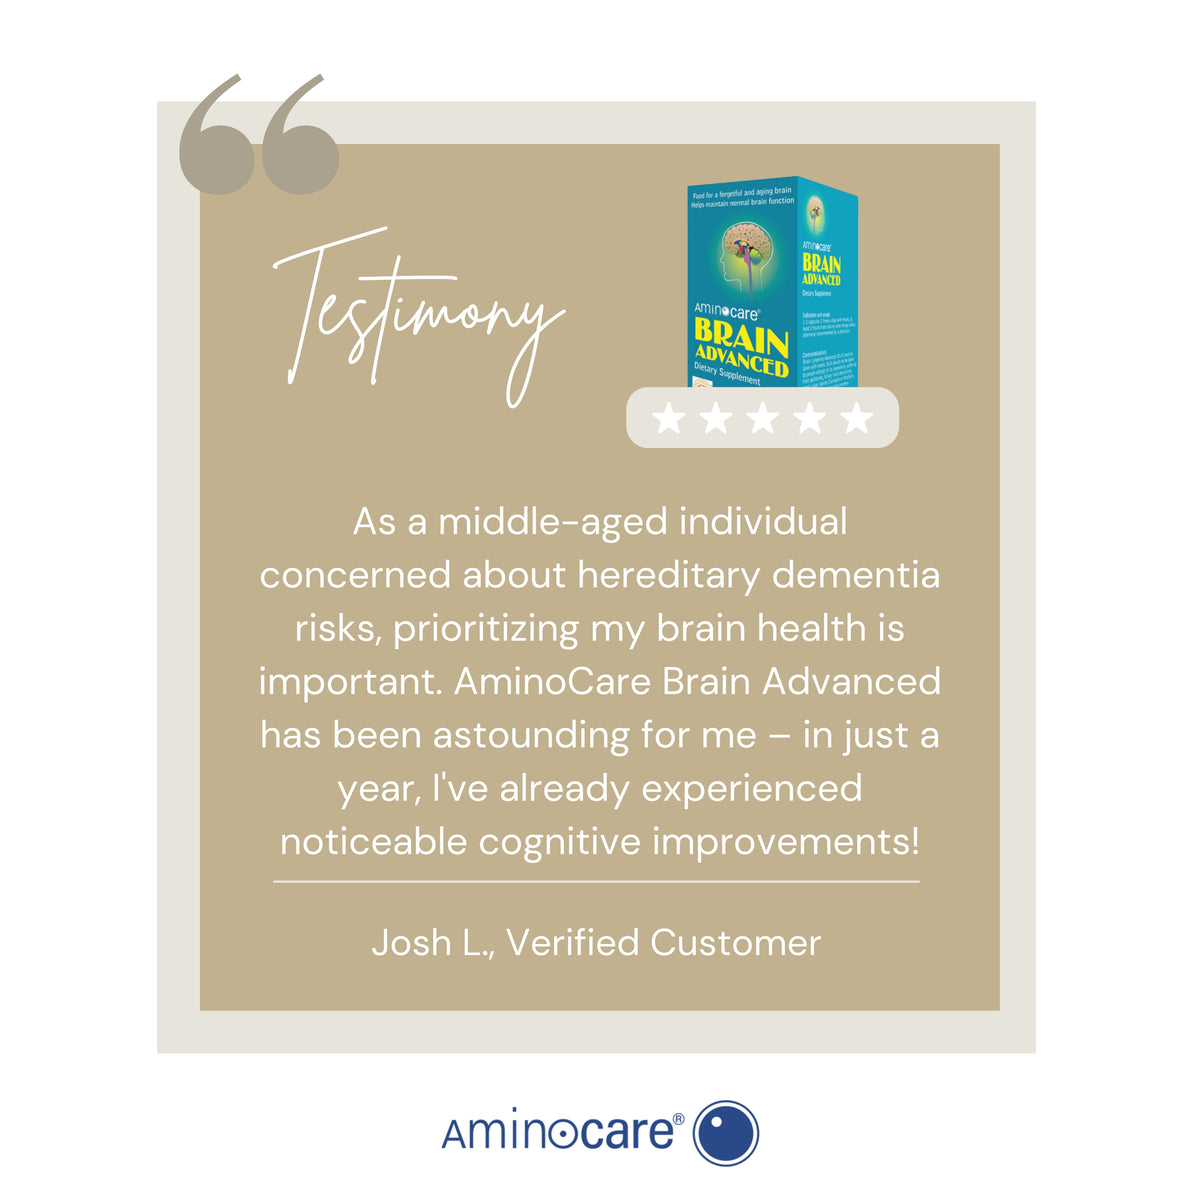 Customer Approved Testimonial for Aminocare Brain Health